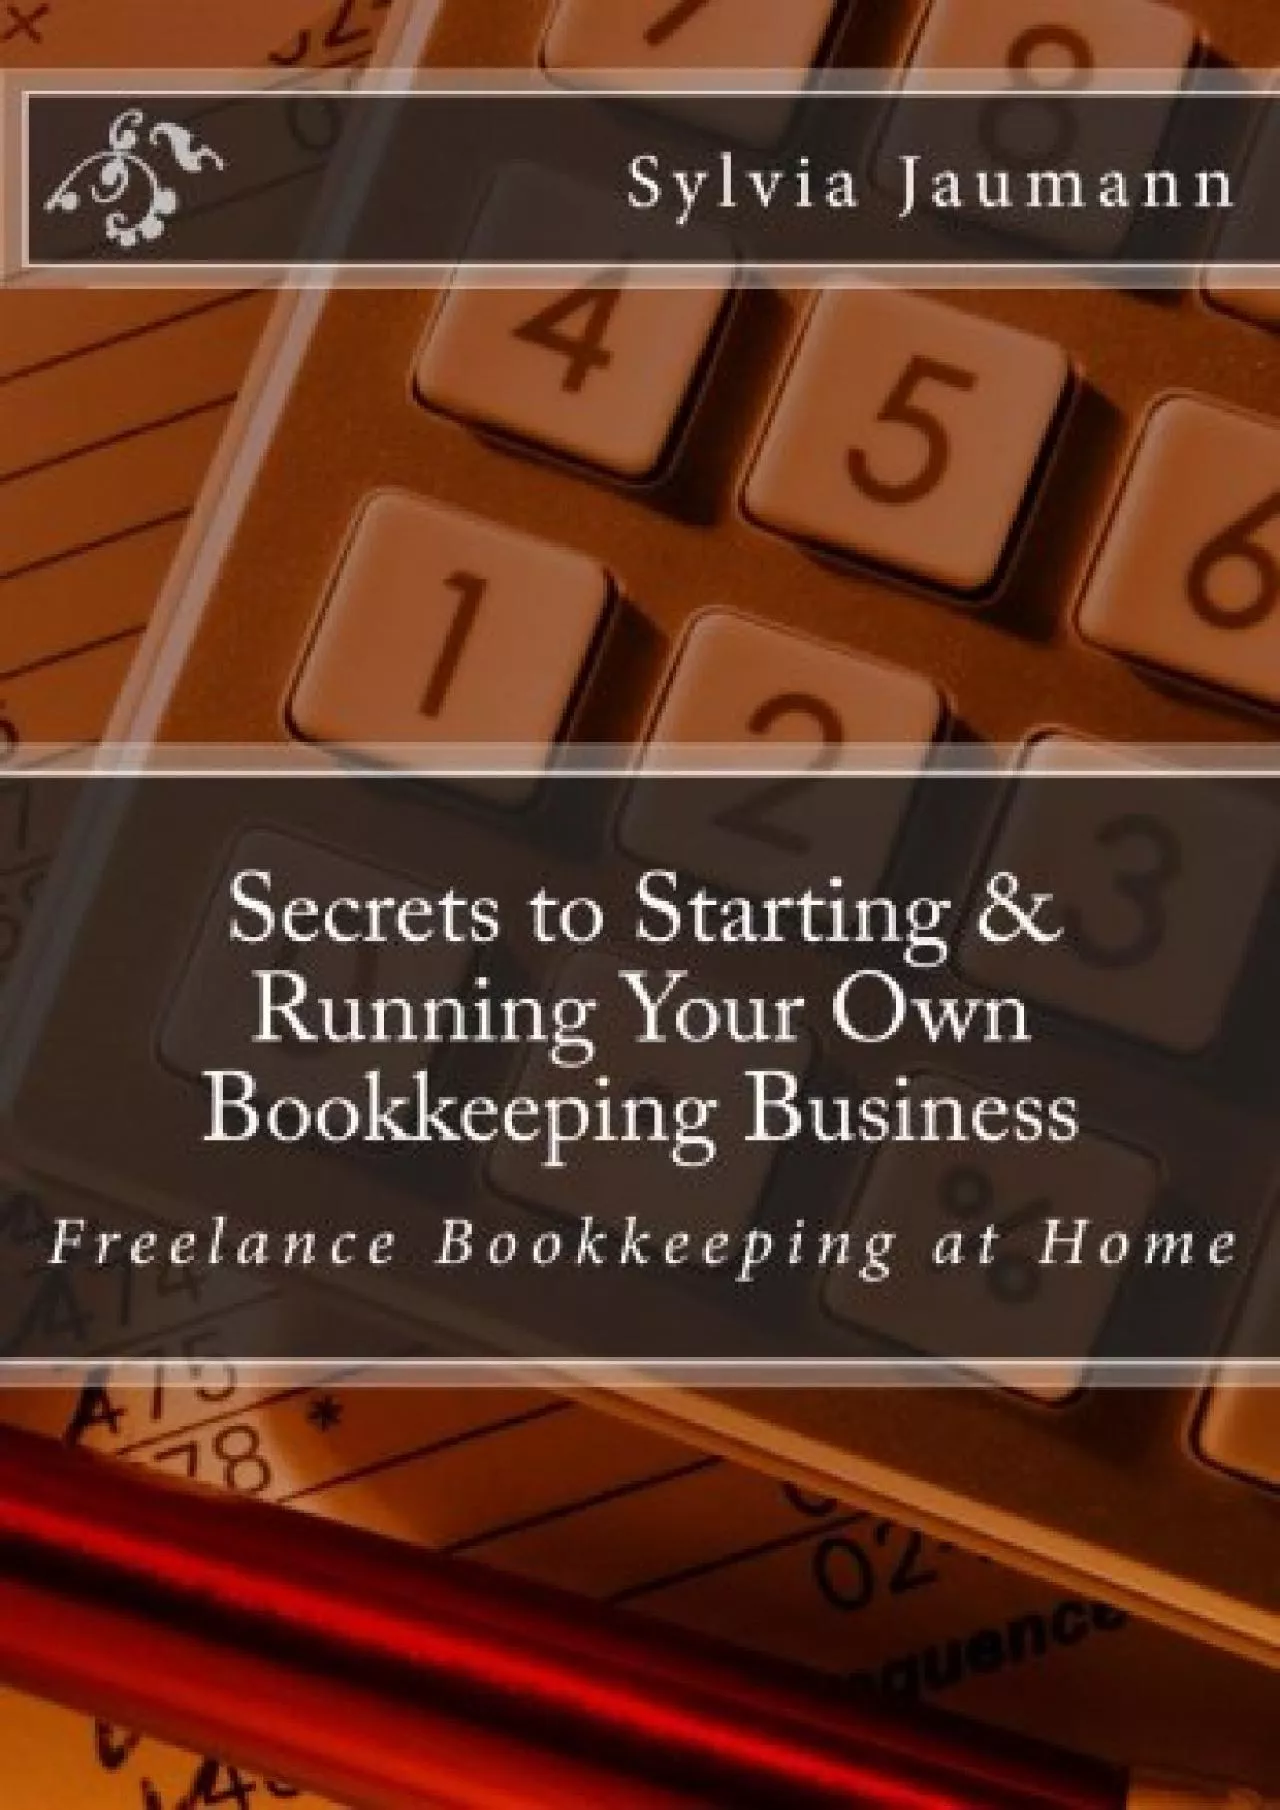 (BOOS)-Secrets to Starting & Running Your Own Bookkeeping Business: Freelance Bookkeeping